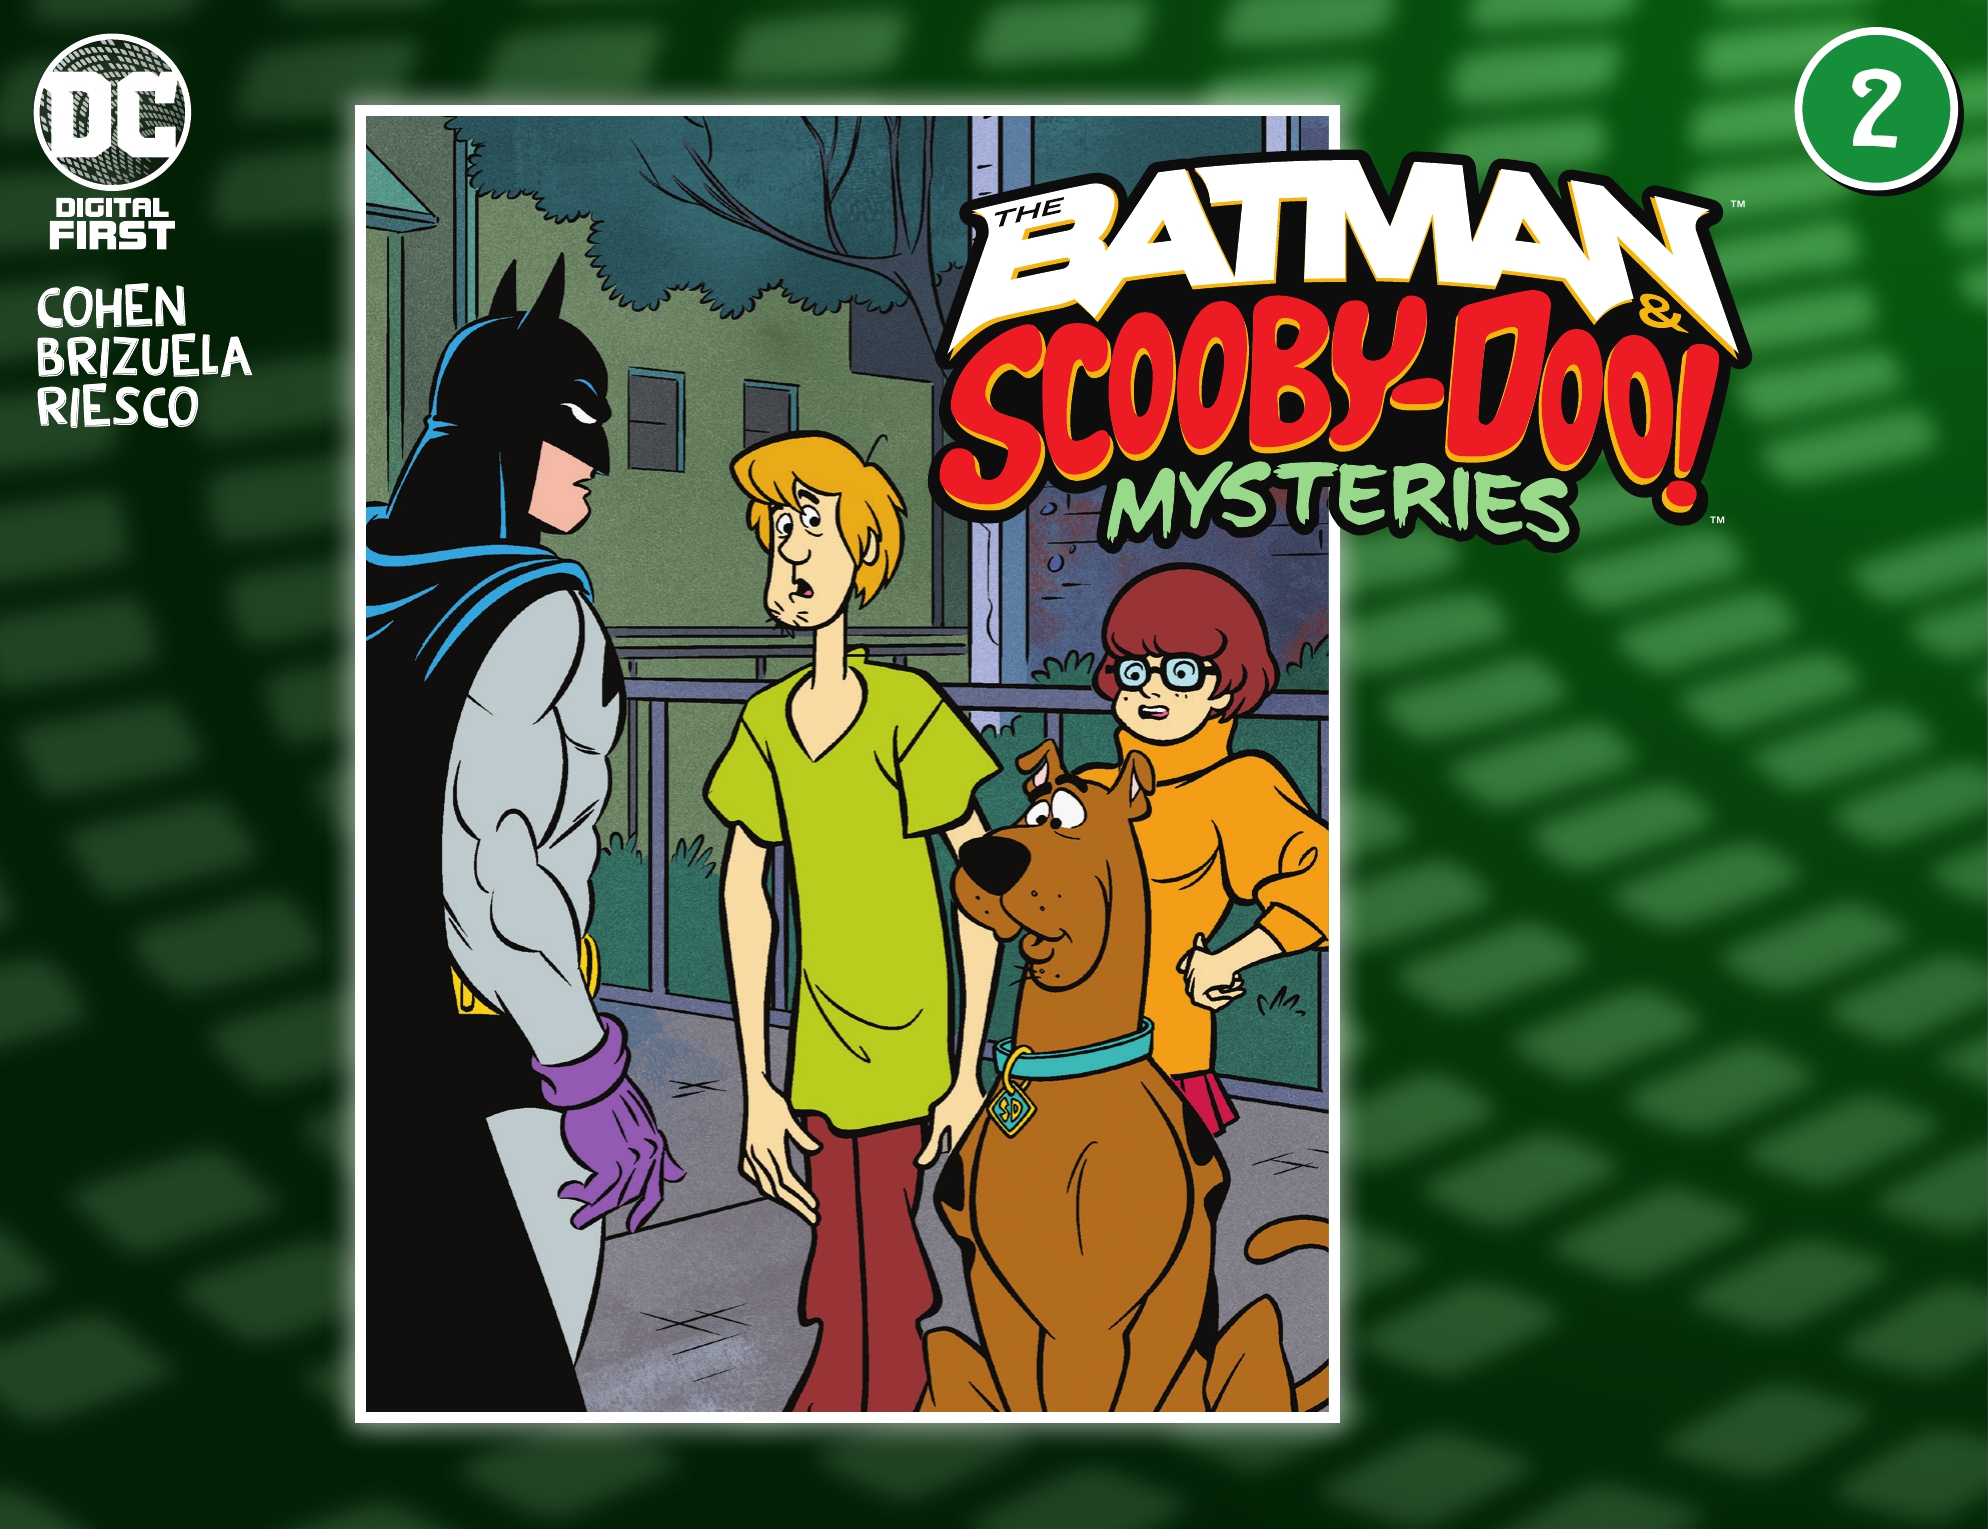 The Batman & Scooby-Doo Mysteries (2021-) (Digital First): Chapter 2 - Page 1